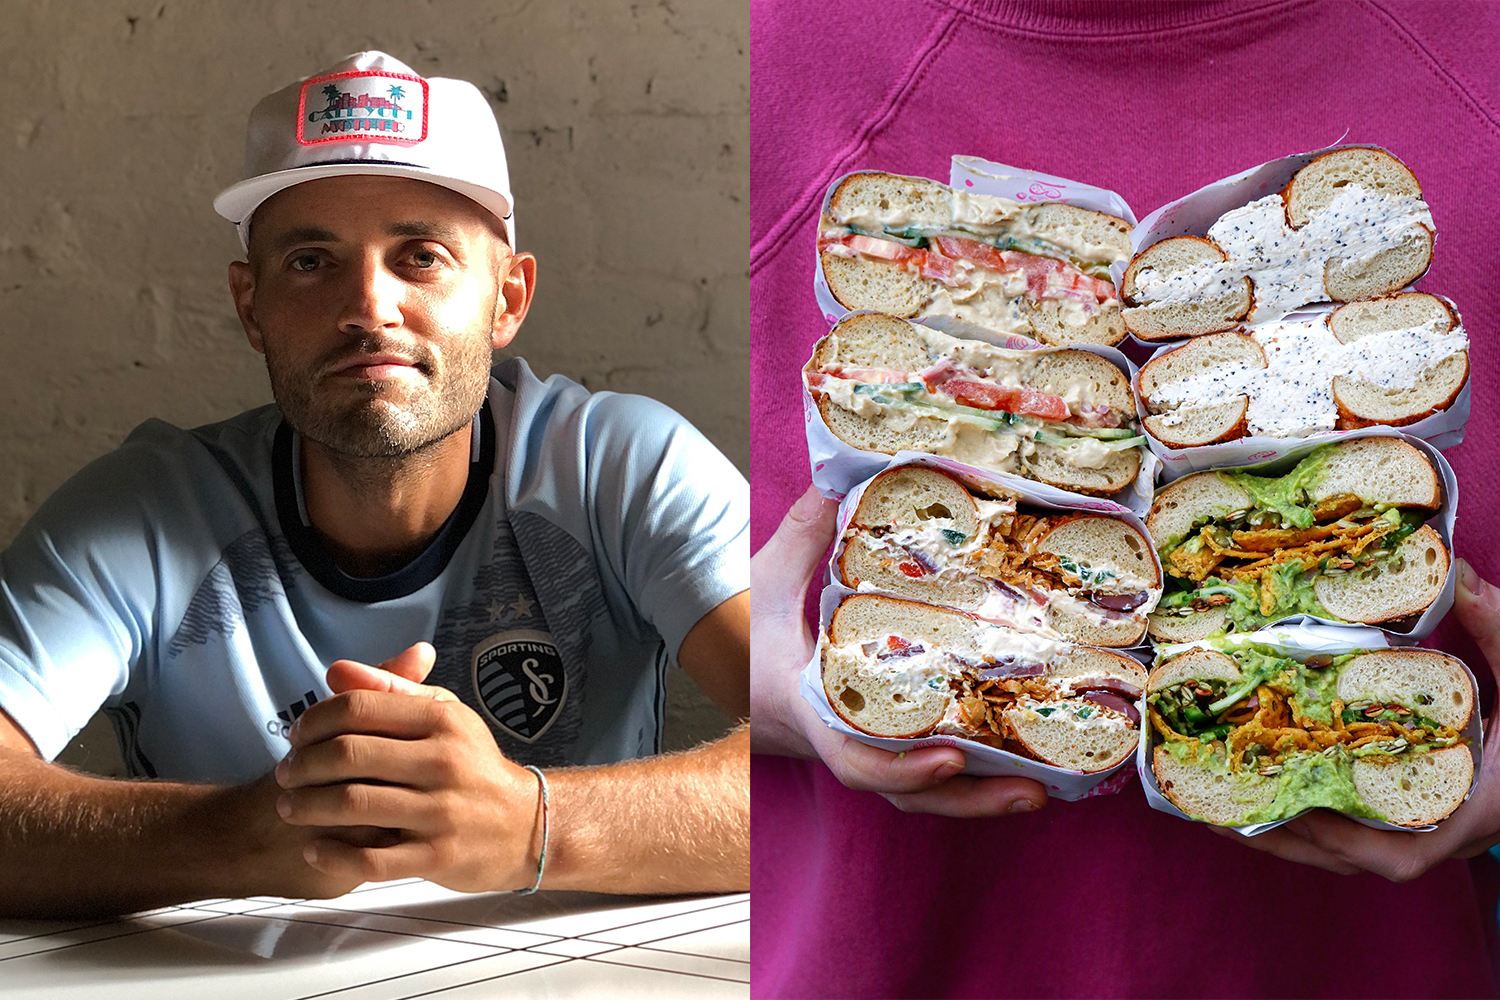 Left: Andrew Dana of Call Your Mother deli and Timber Pizza. Right: Bagel sandwiches from Call Your Mother Deli